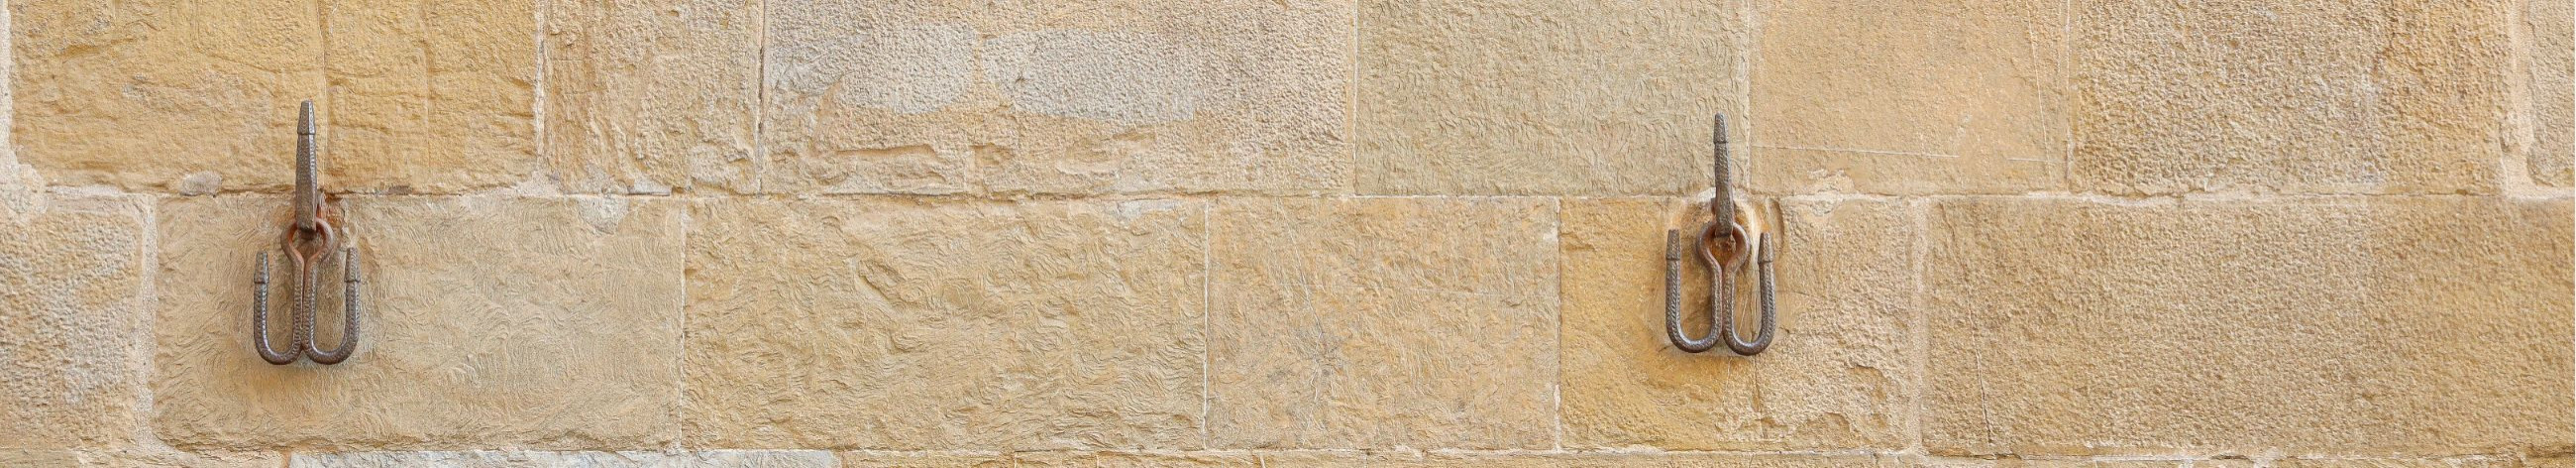 We specialize in restoration works, interior finishing, and general construction with a focus on limestone and old walls.